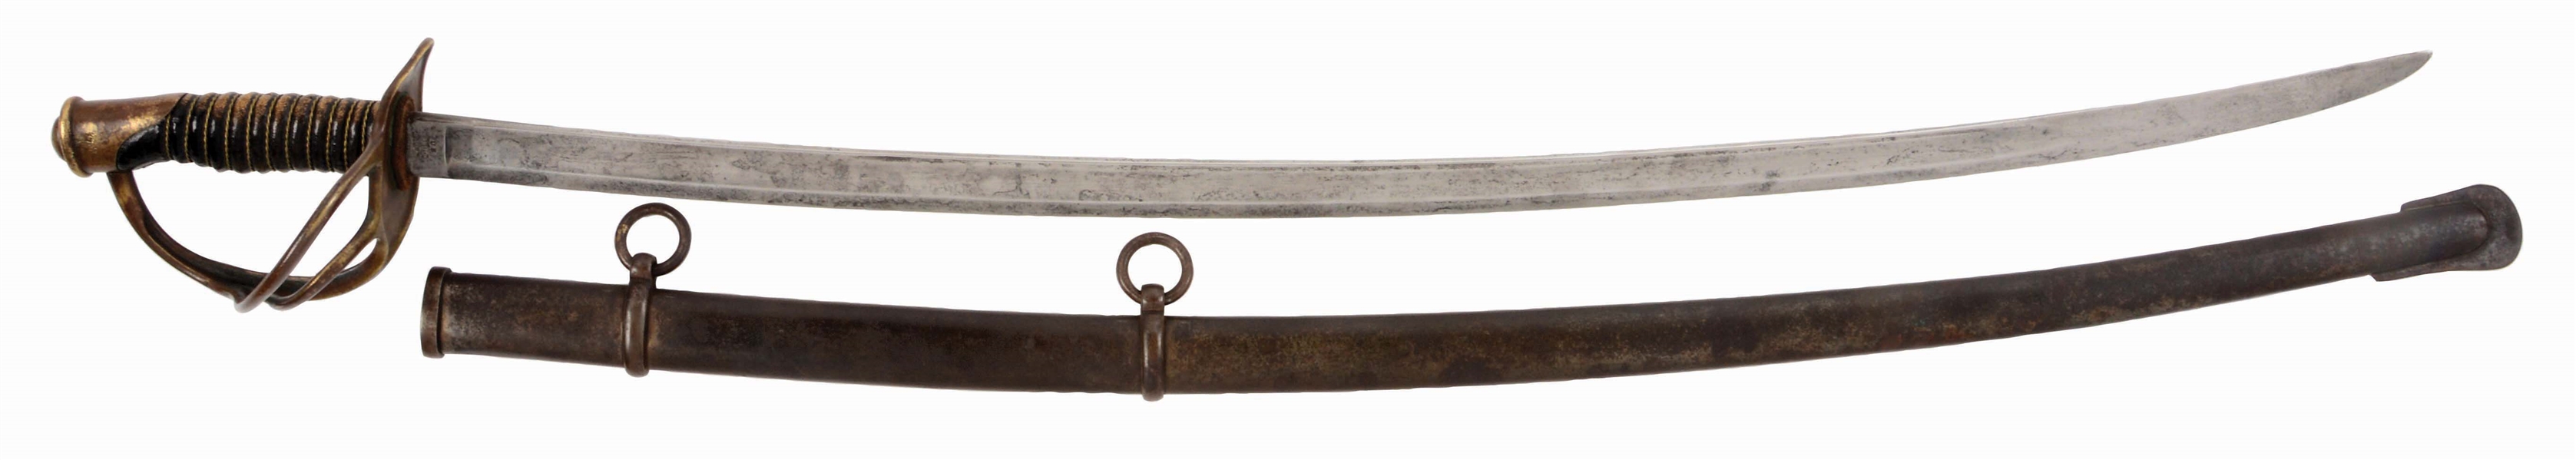 EARLY AMES 1859 MANUFACTURED U.S. MODEL 1860 CAVALRY SABER.